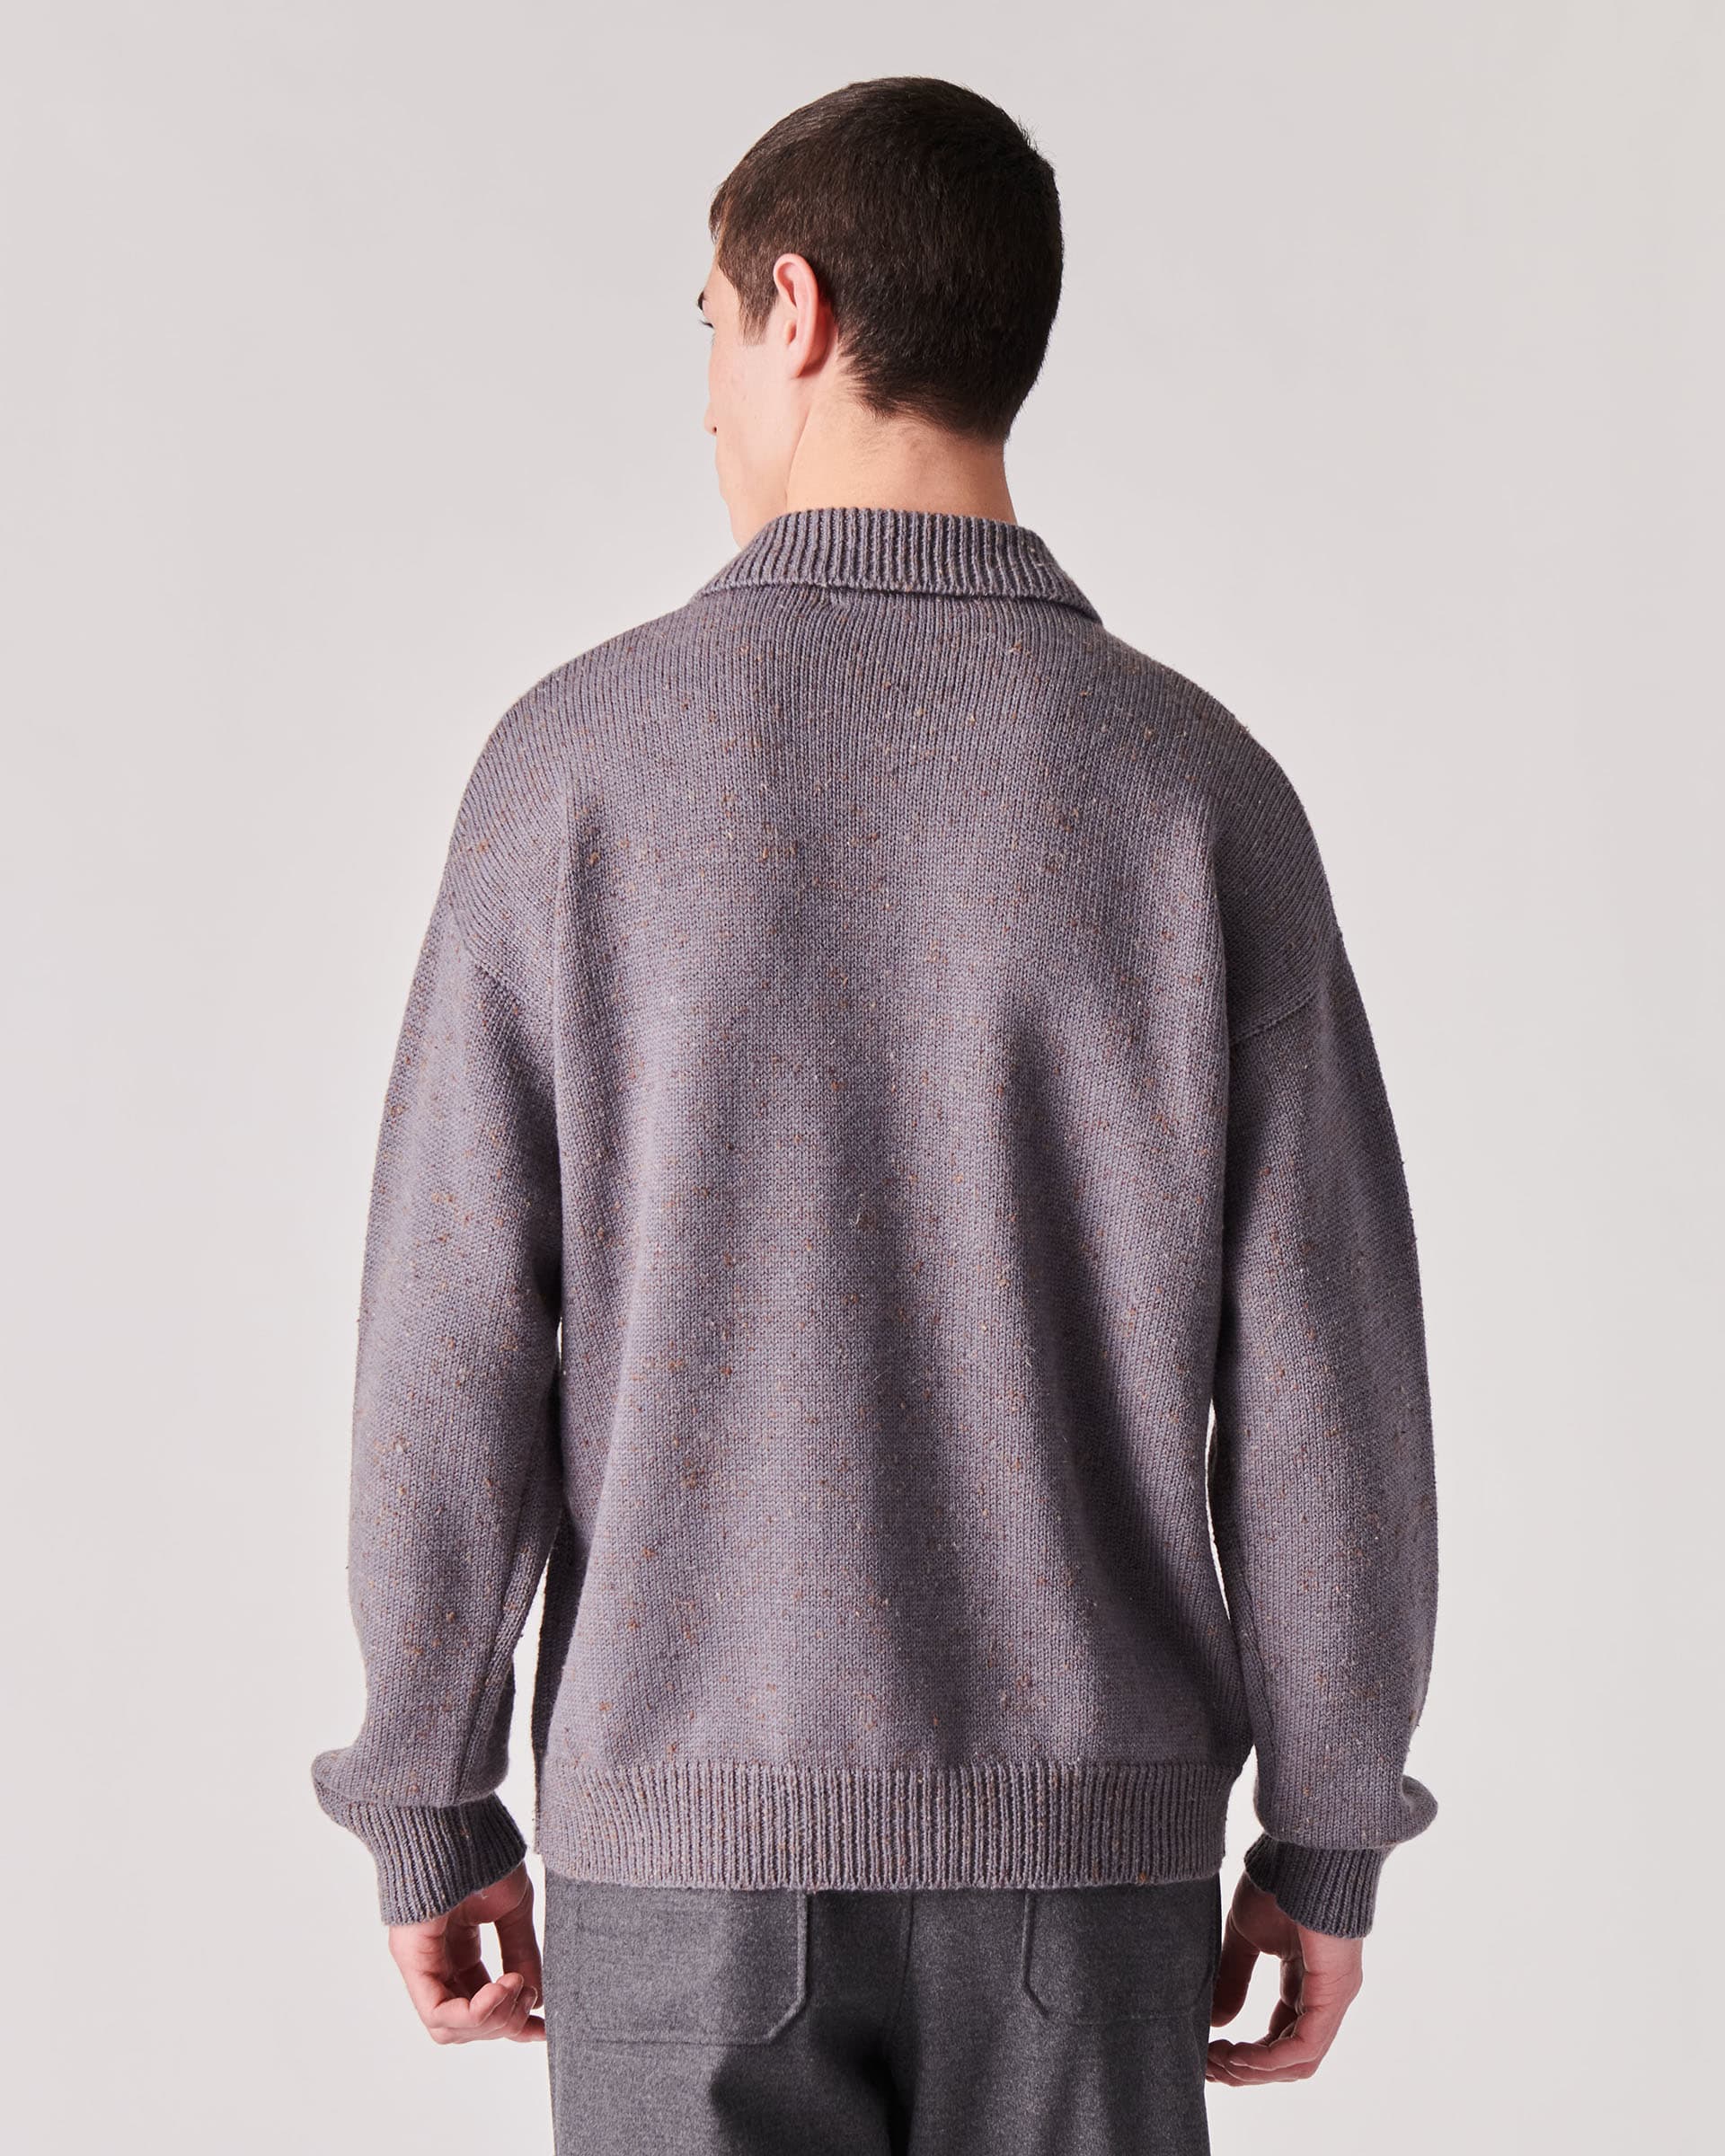 The Market Store | Cardigan Sweater With Shirt Collar